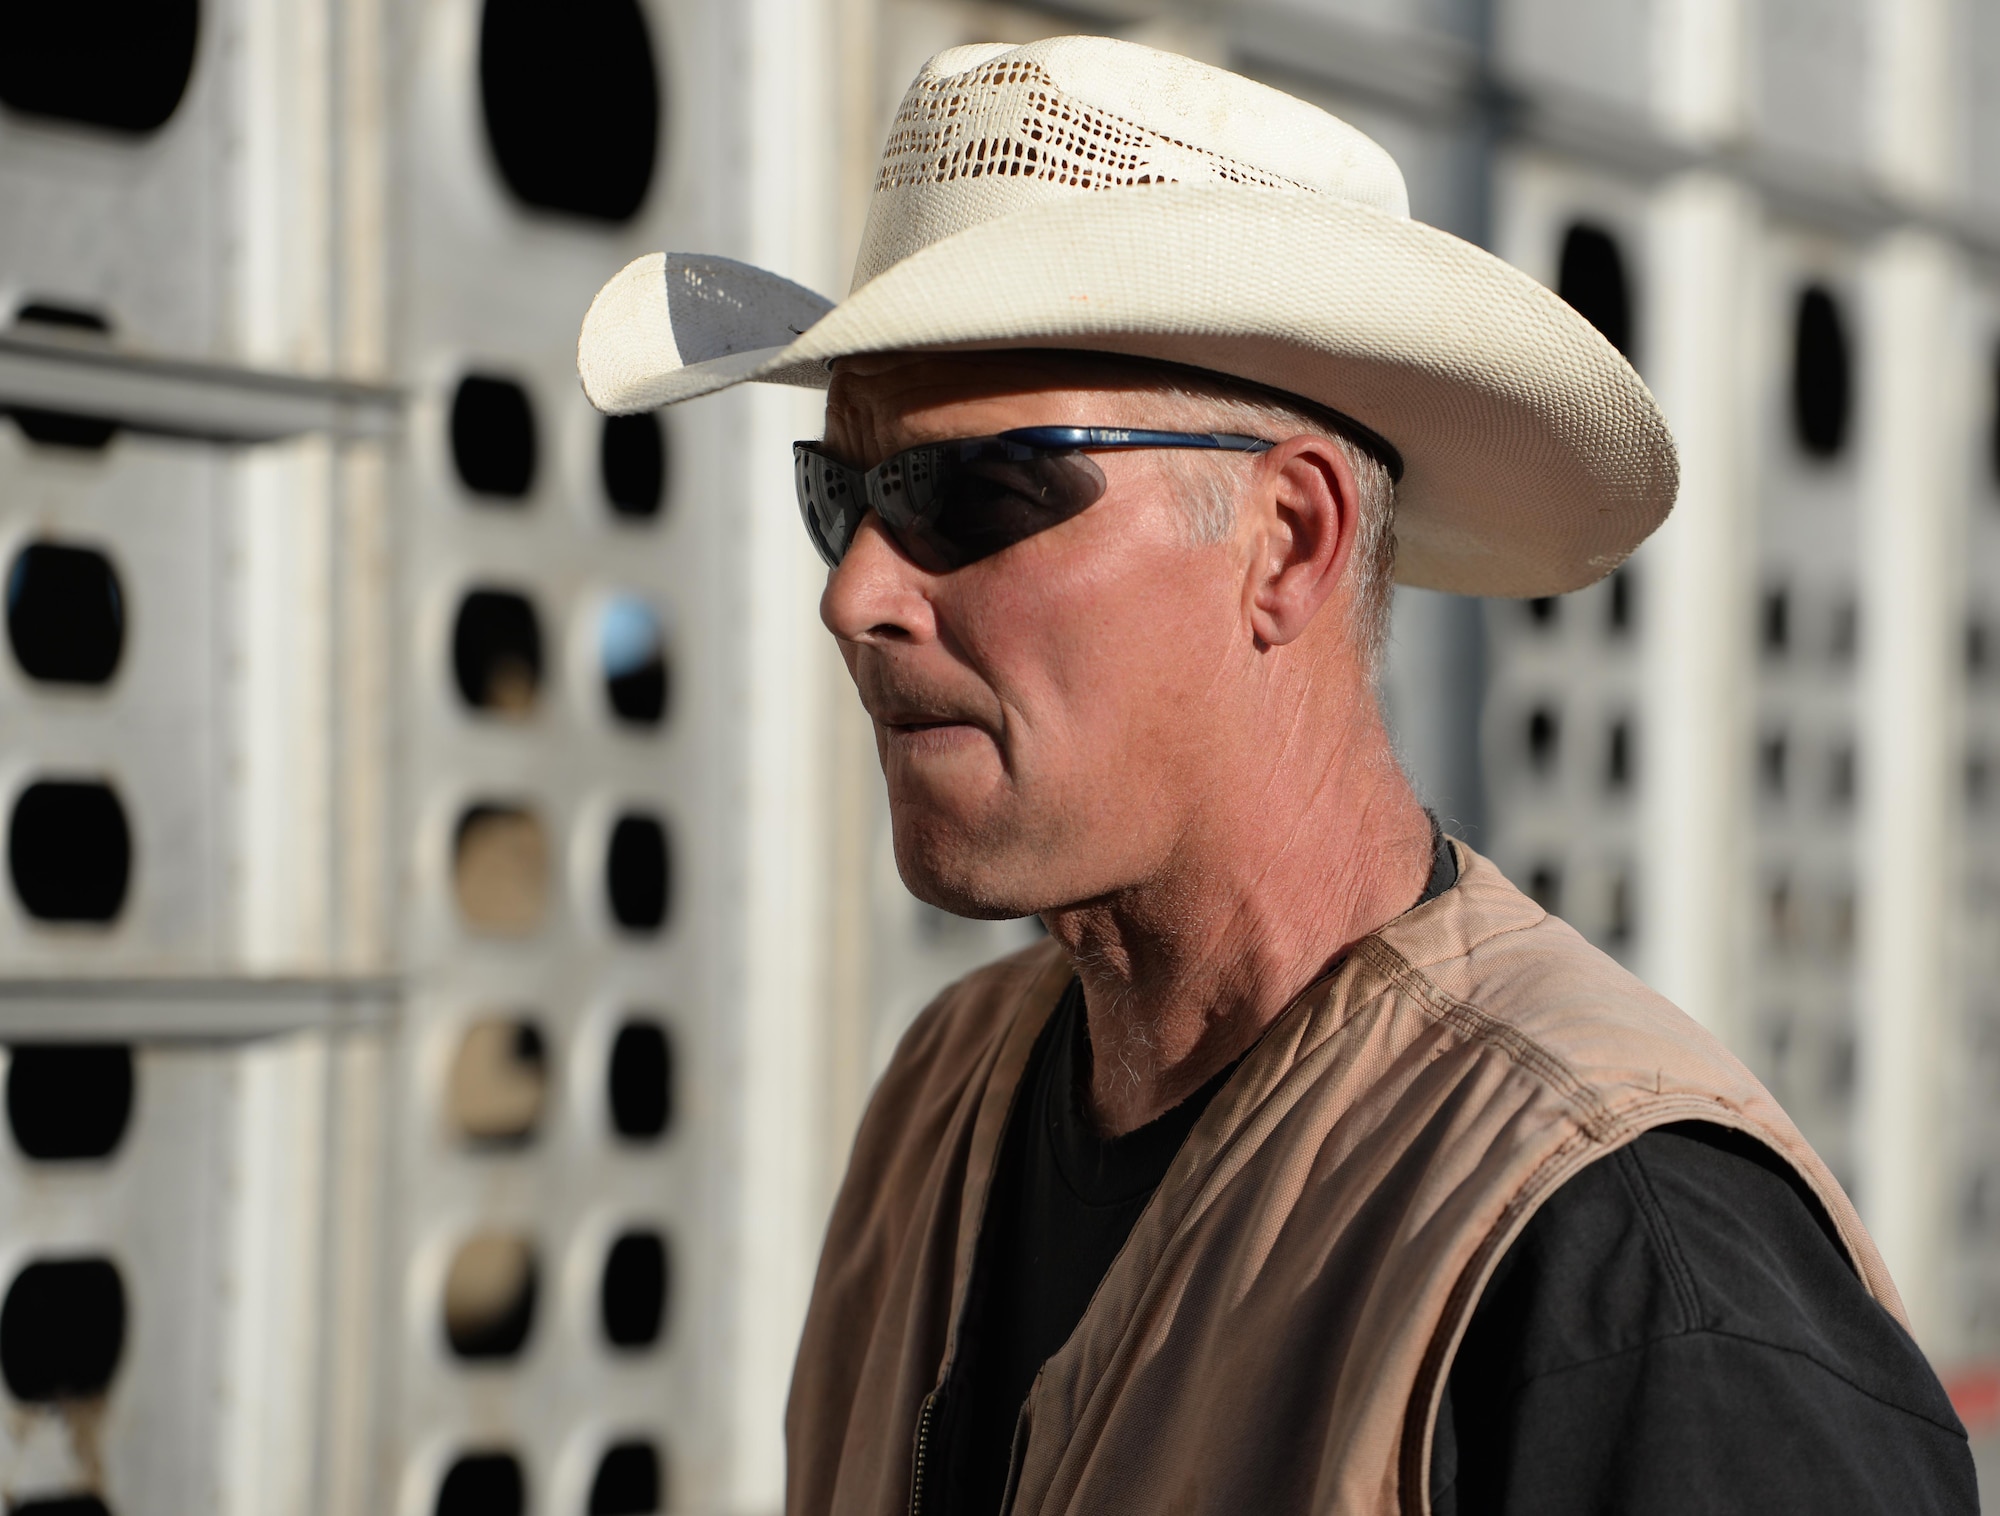 Ed Broskey, 9th Civil Engineer Squadron biological science technician, waits to unload a herd of cattle from a trailer Nov. 2, 2016, at Beale Air Force Base, California. Broskey has been working with cattle for 18 years and is known as the “Government Cowboy.” (U.S. Air Force photo/Airman Tristan D. Viglianco)